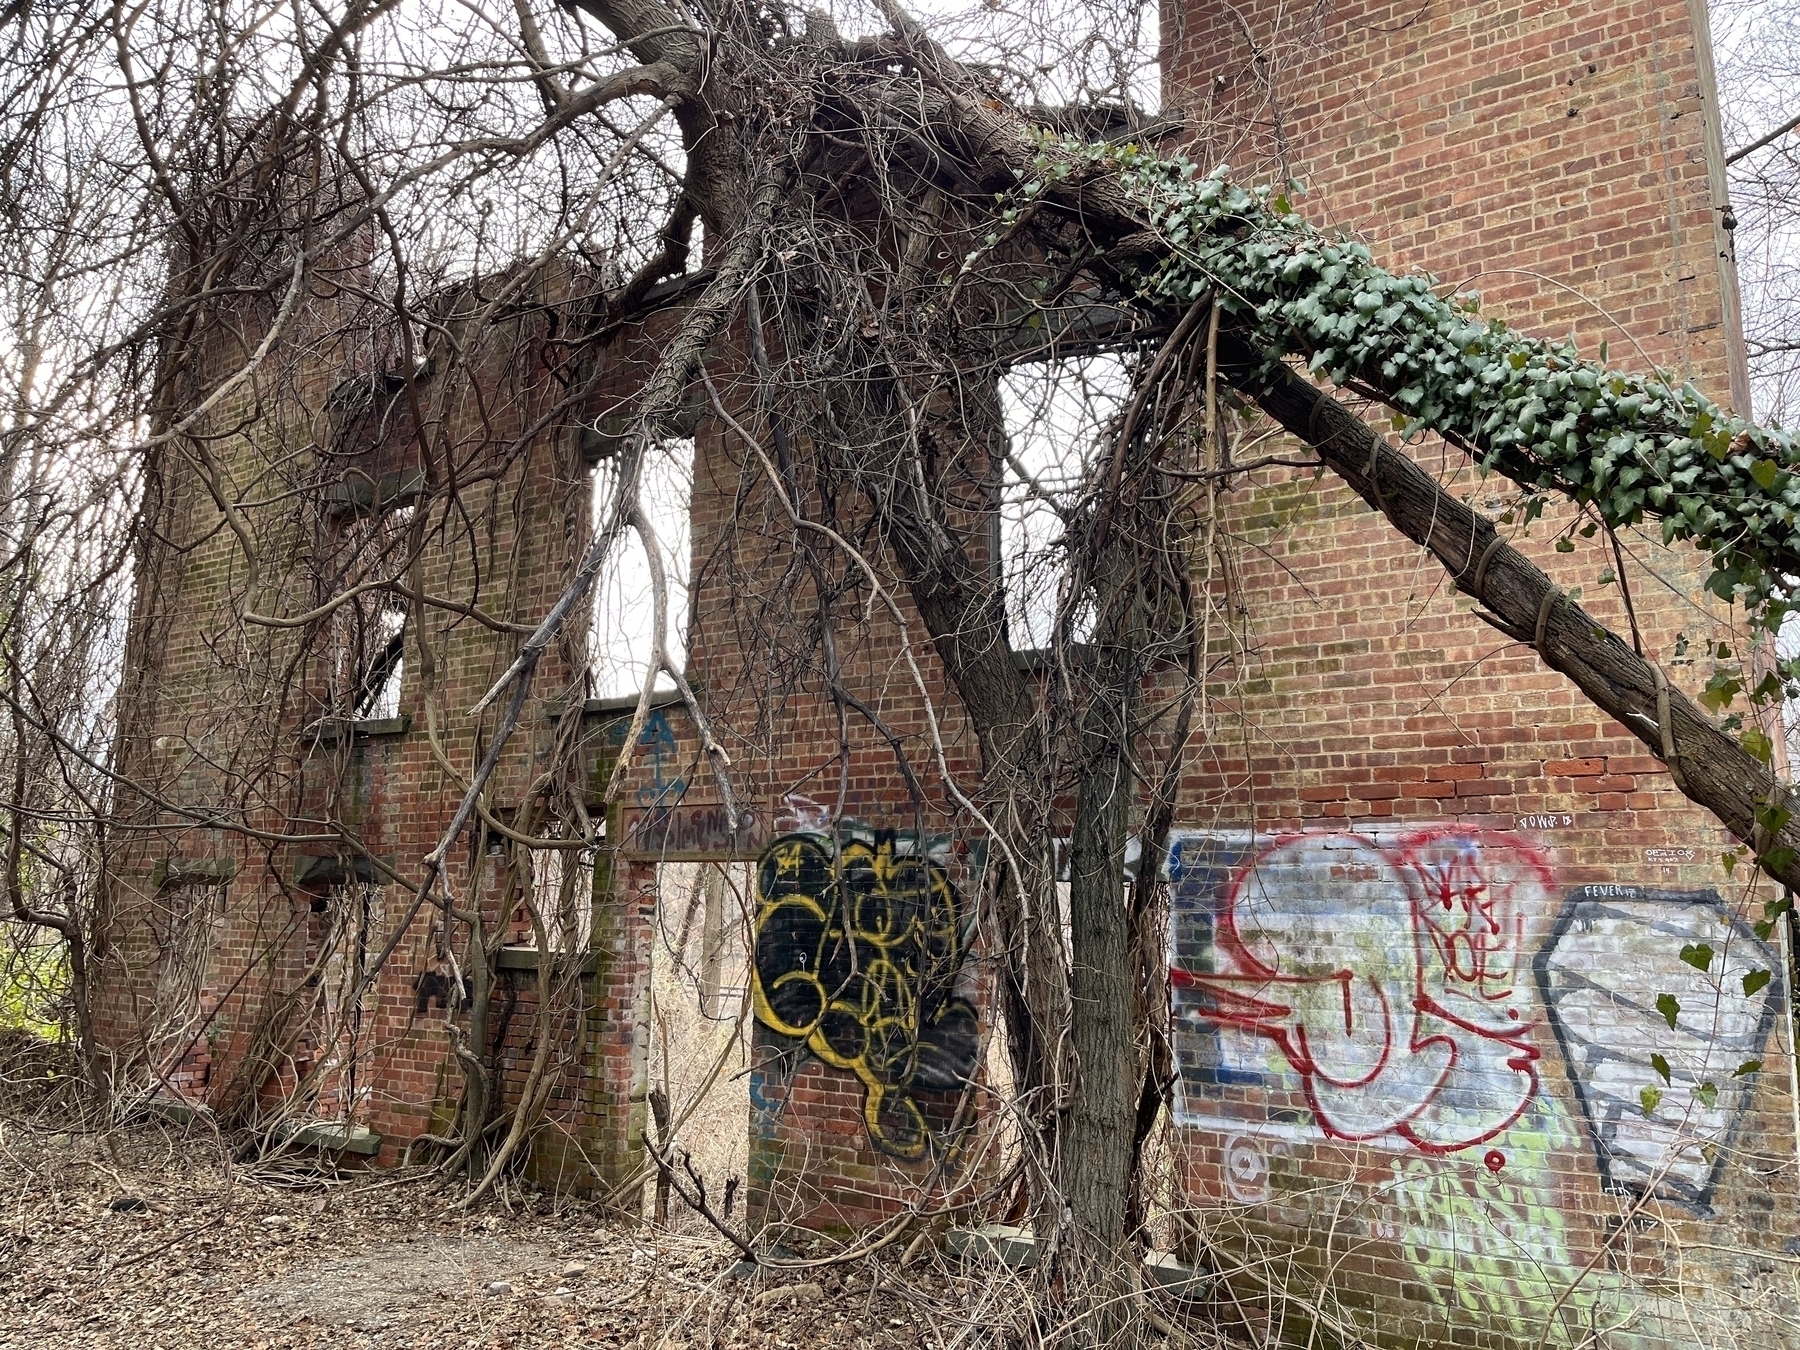 A dilapidated brick structure with bare trees and vines growing over it. Indescribable graffiti adorns the wall. 